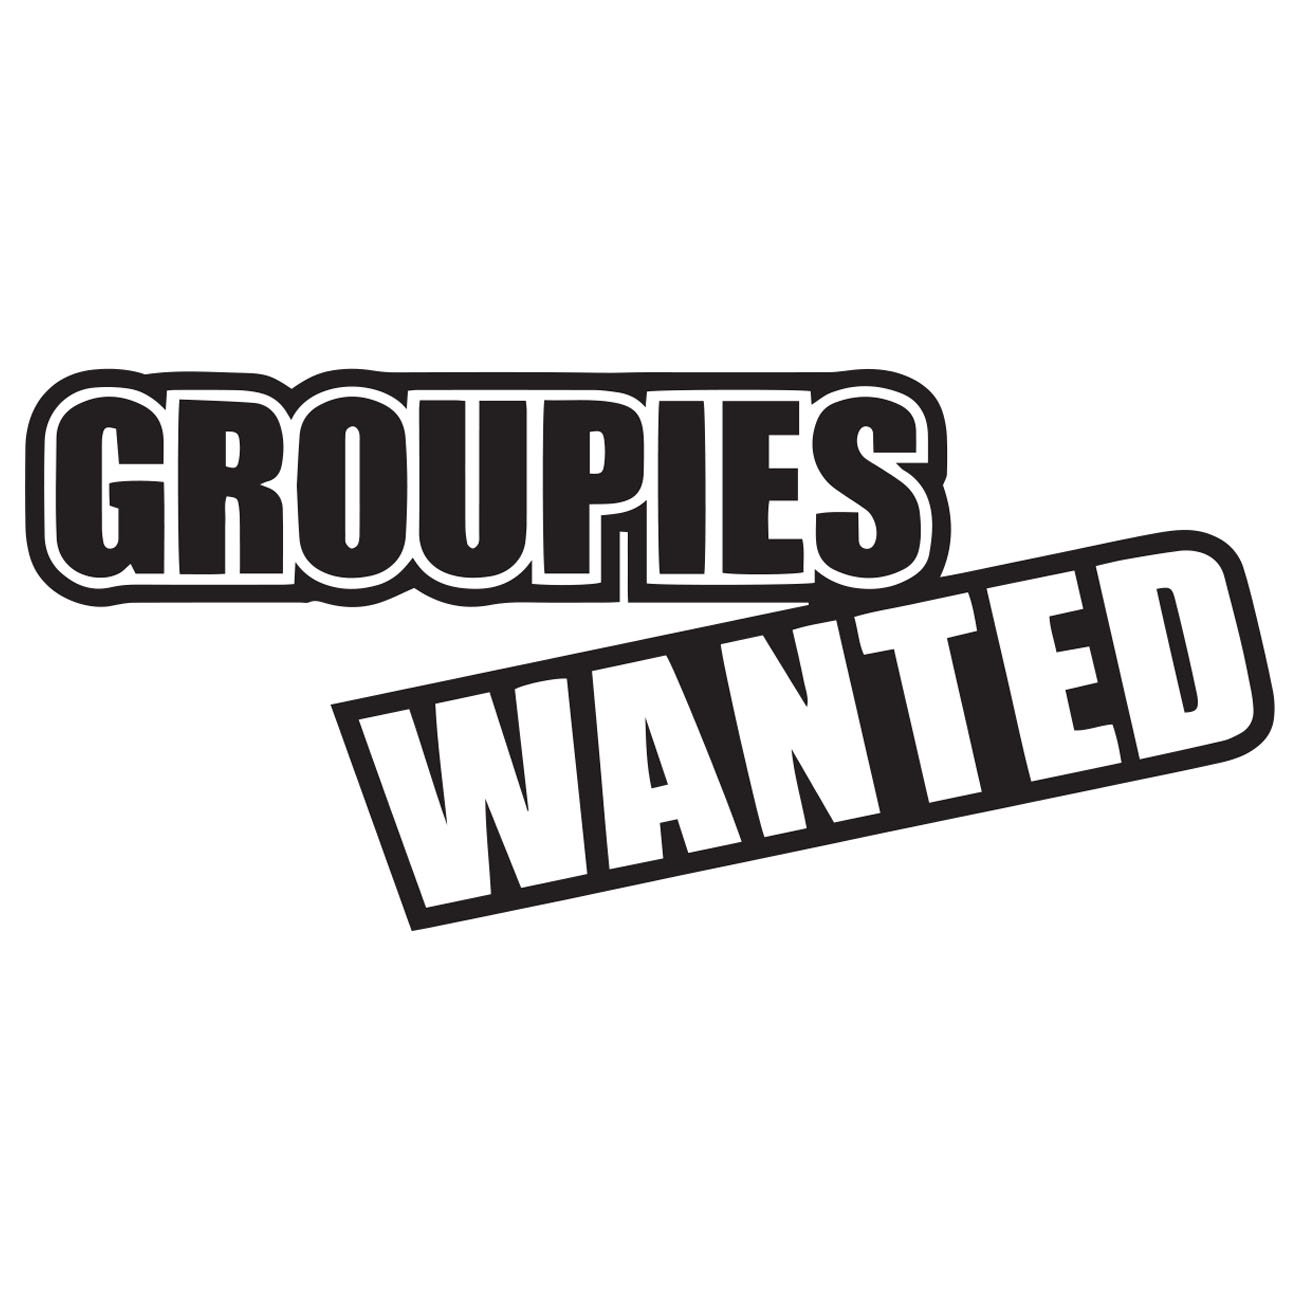 Groupies wanted